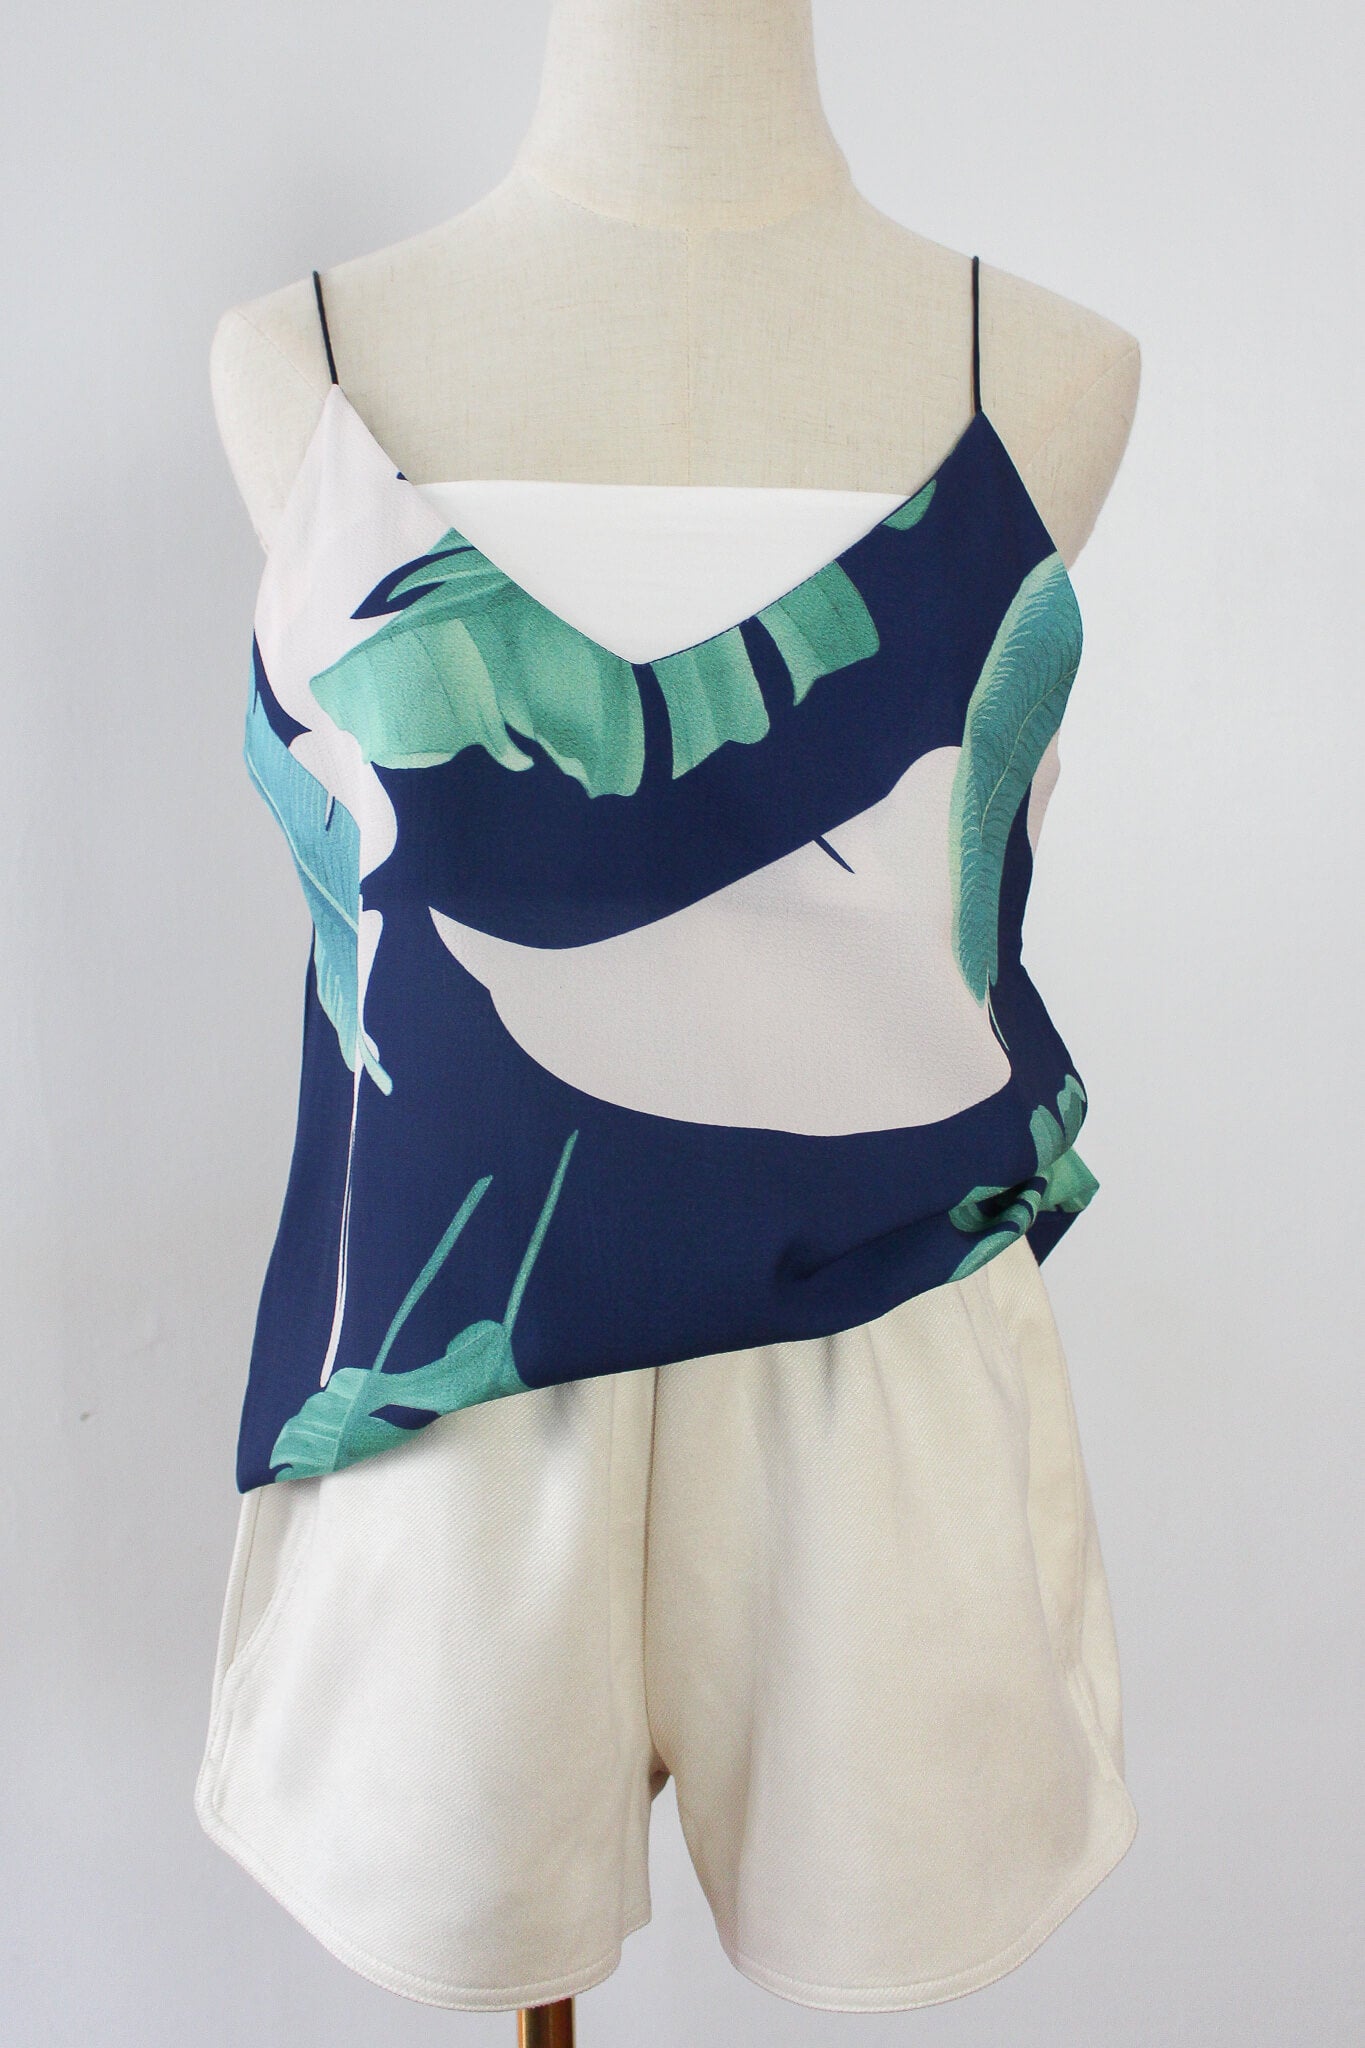 Leaf printed loosely fitted camisole